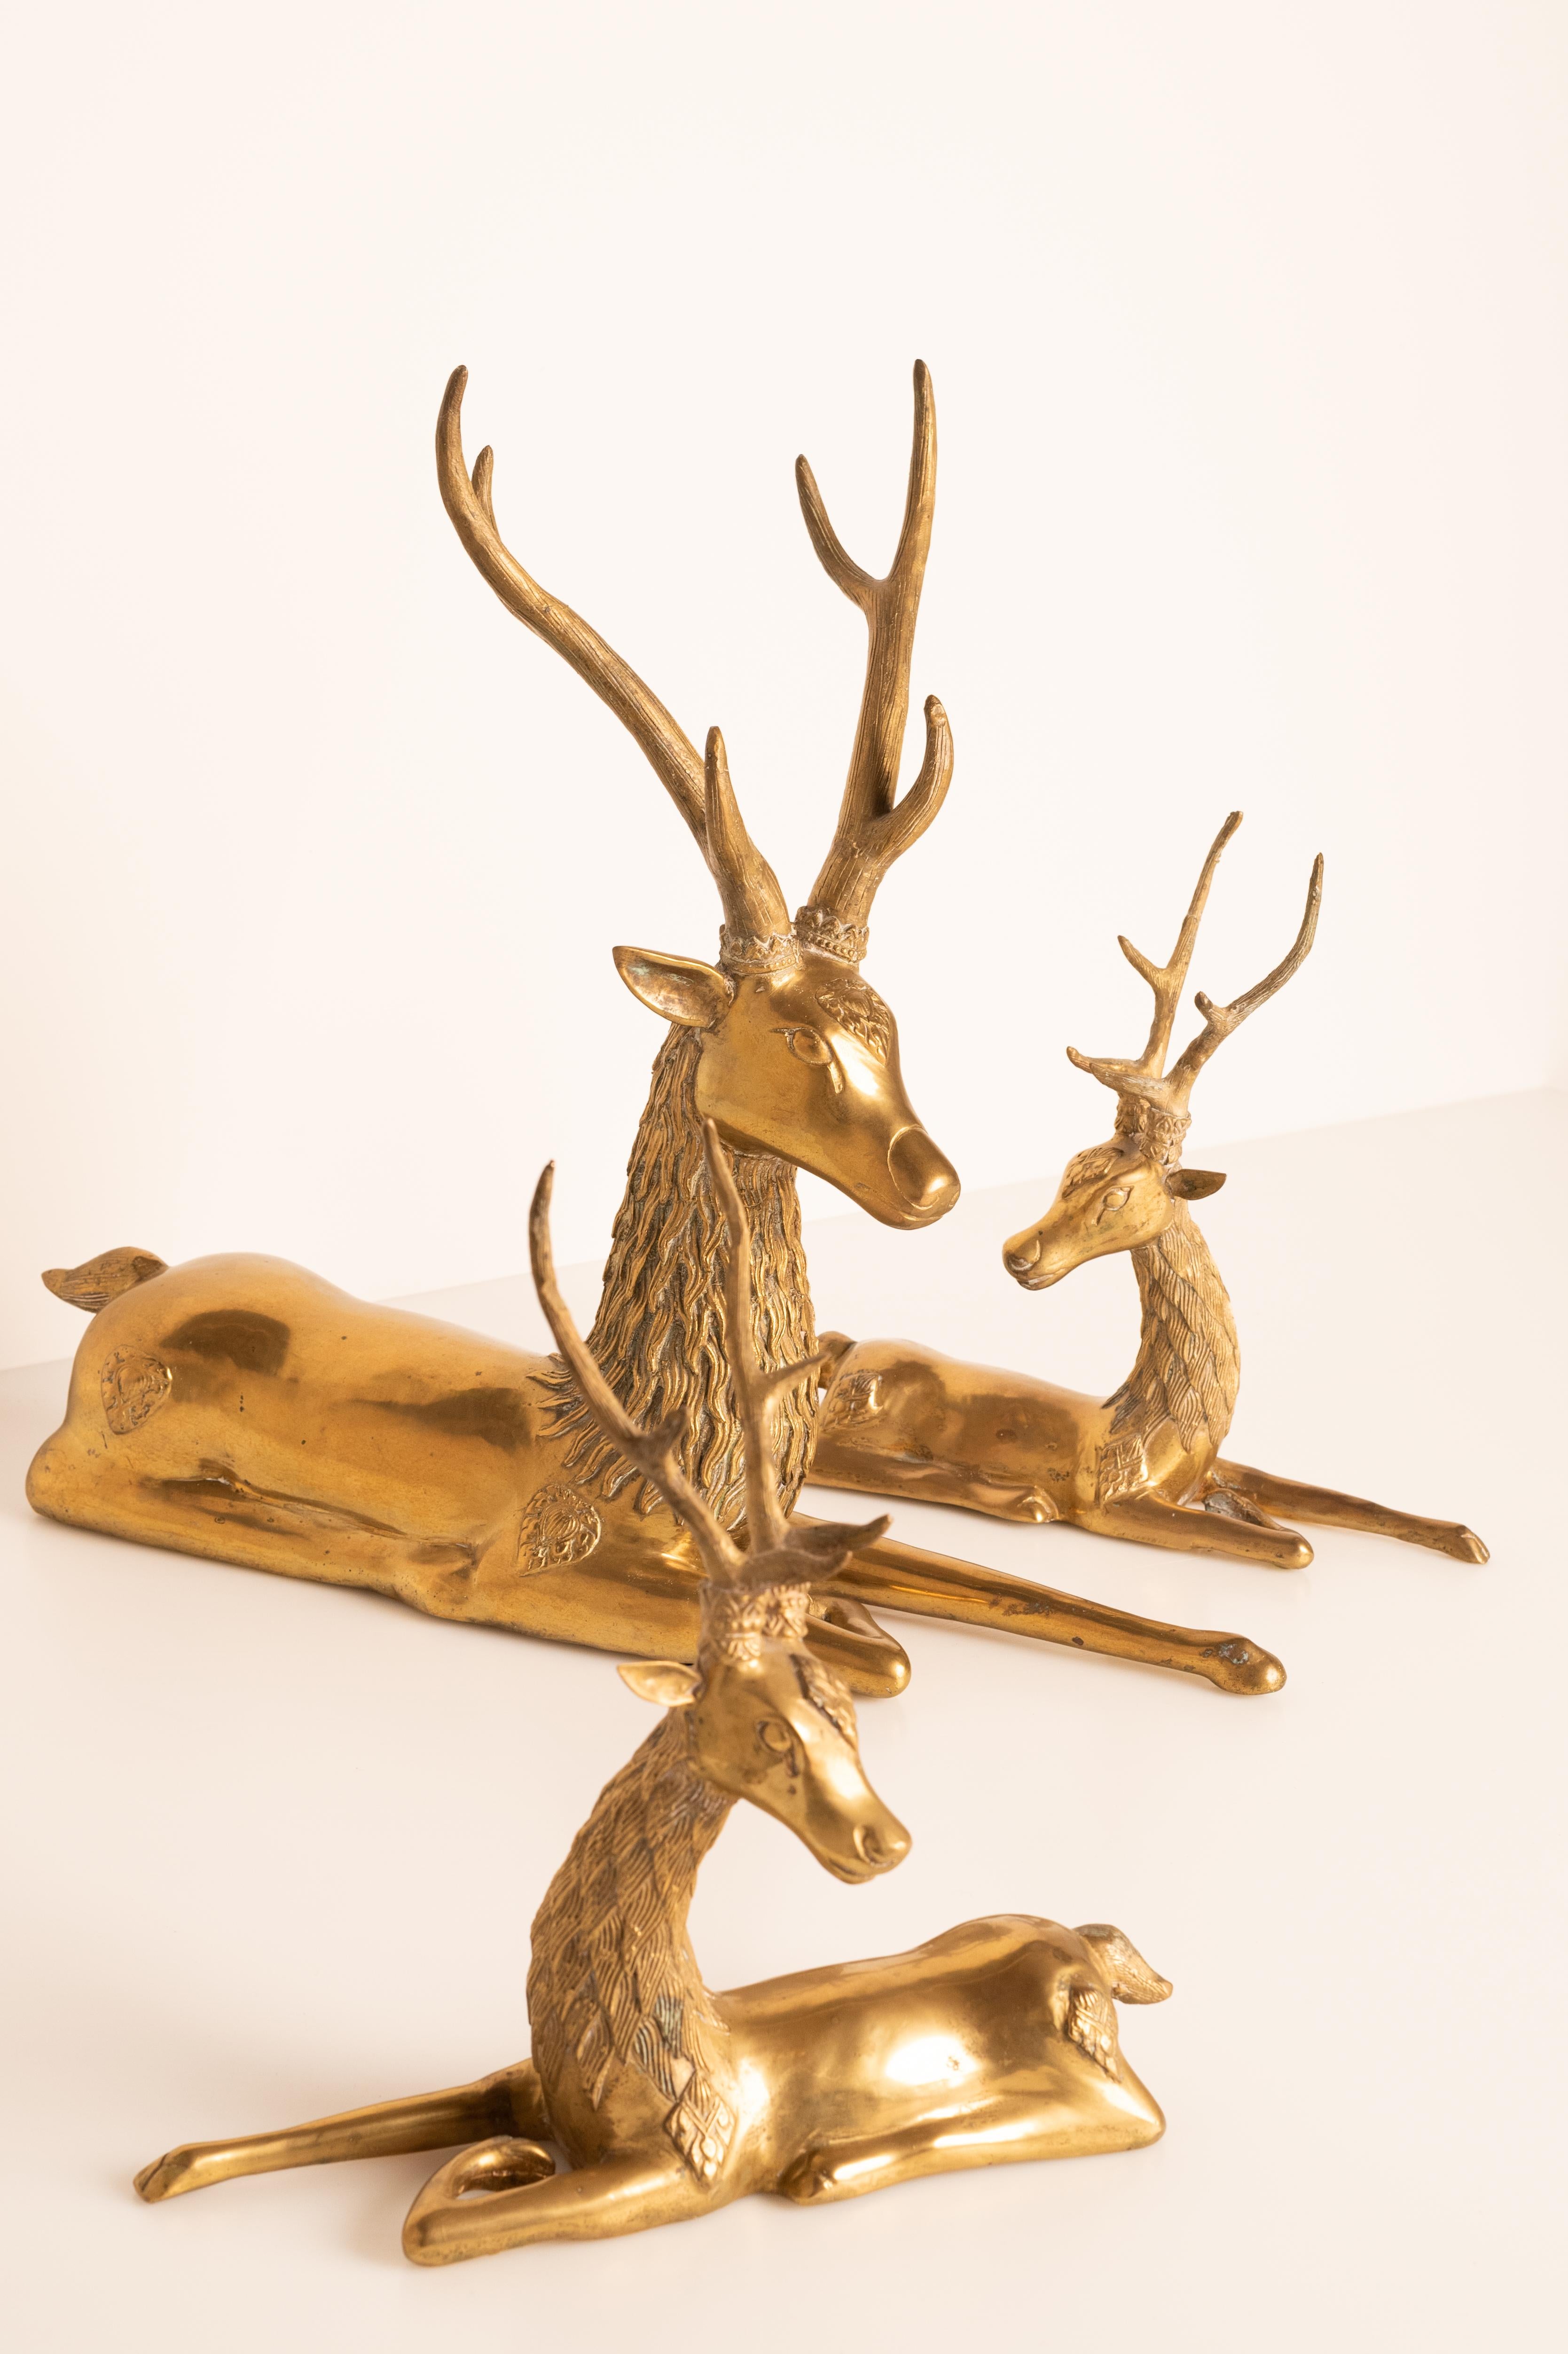 Lot of 3 deer in different size, design after Sarreid. The tallest one is 55 cm long, 50 cm high and 13 cm wide. The other 2 are smaller (equally sized) and are 32 cm long and 33 cm high. 